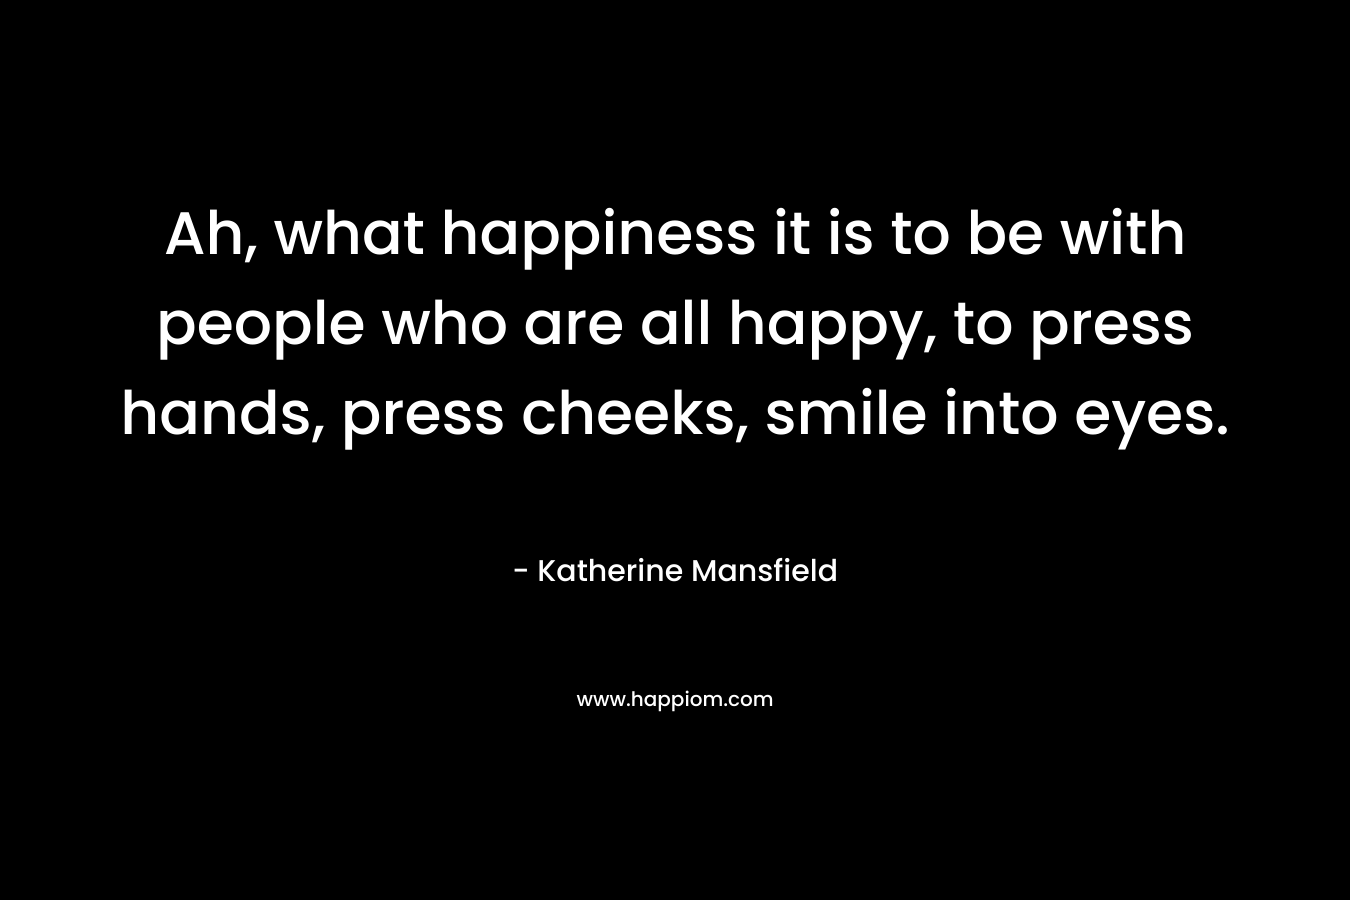 Ah, what happiness it is to be with people who are all happy, to press hands, press cheeks, smile into eyes. – Katherine Mansfield